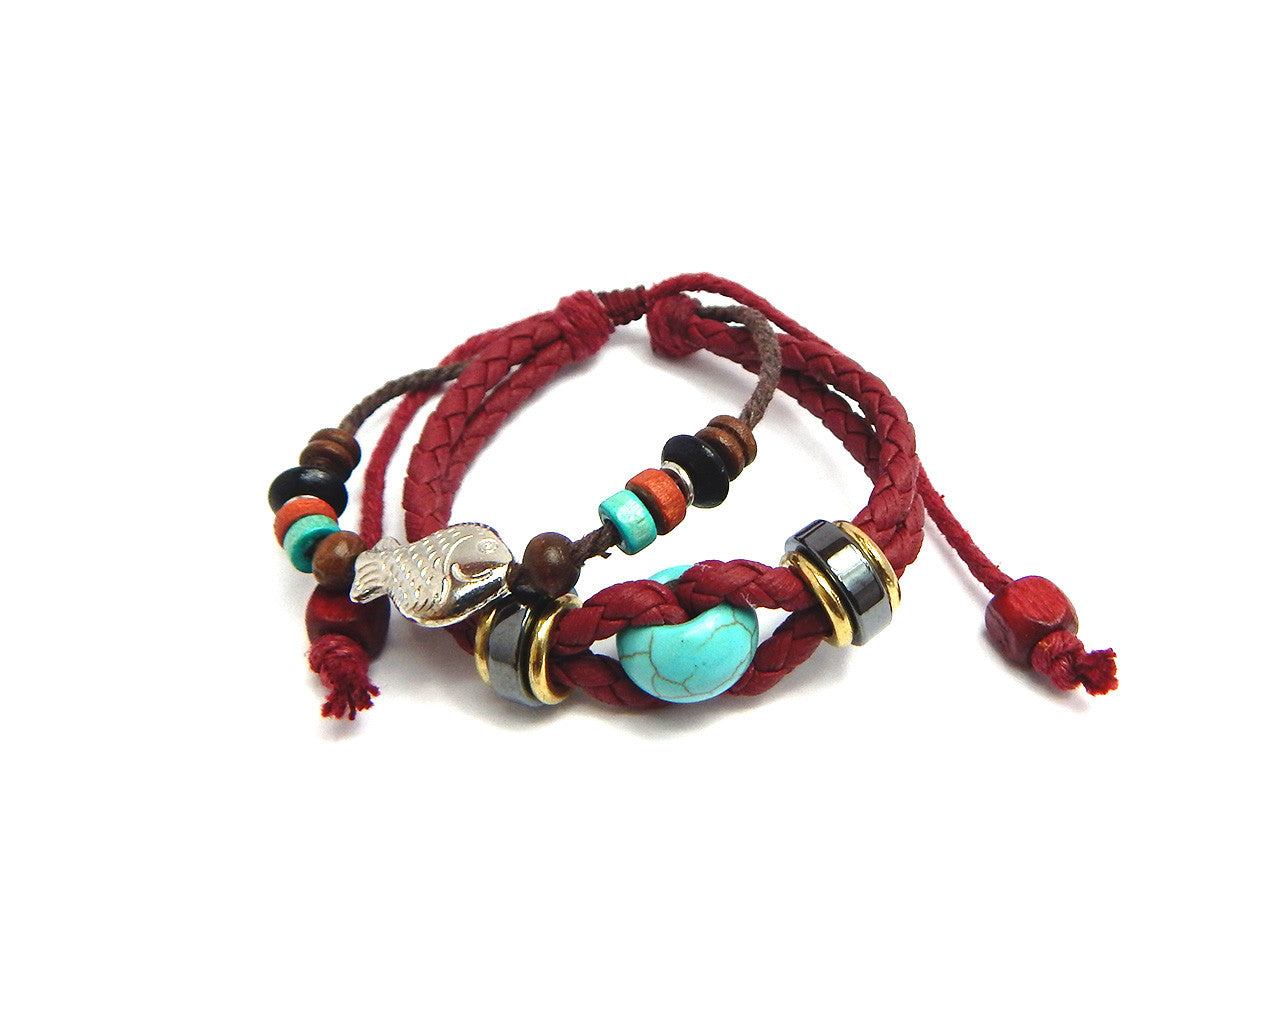 Ethnic Bracelet Turquoise Bead - Natural Clothes Bamboo Clothing & Accessories for Men & Women 